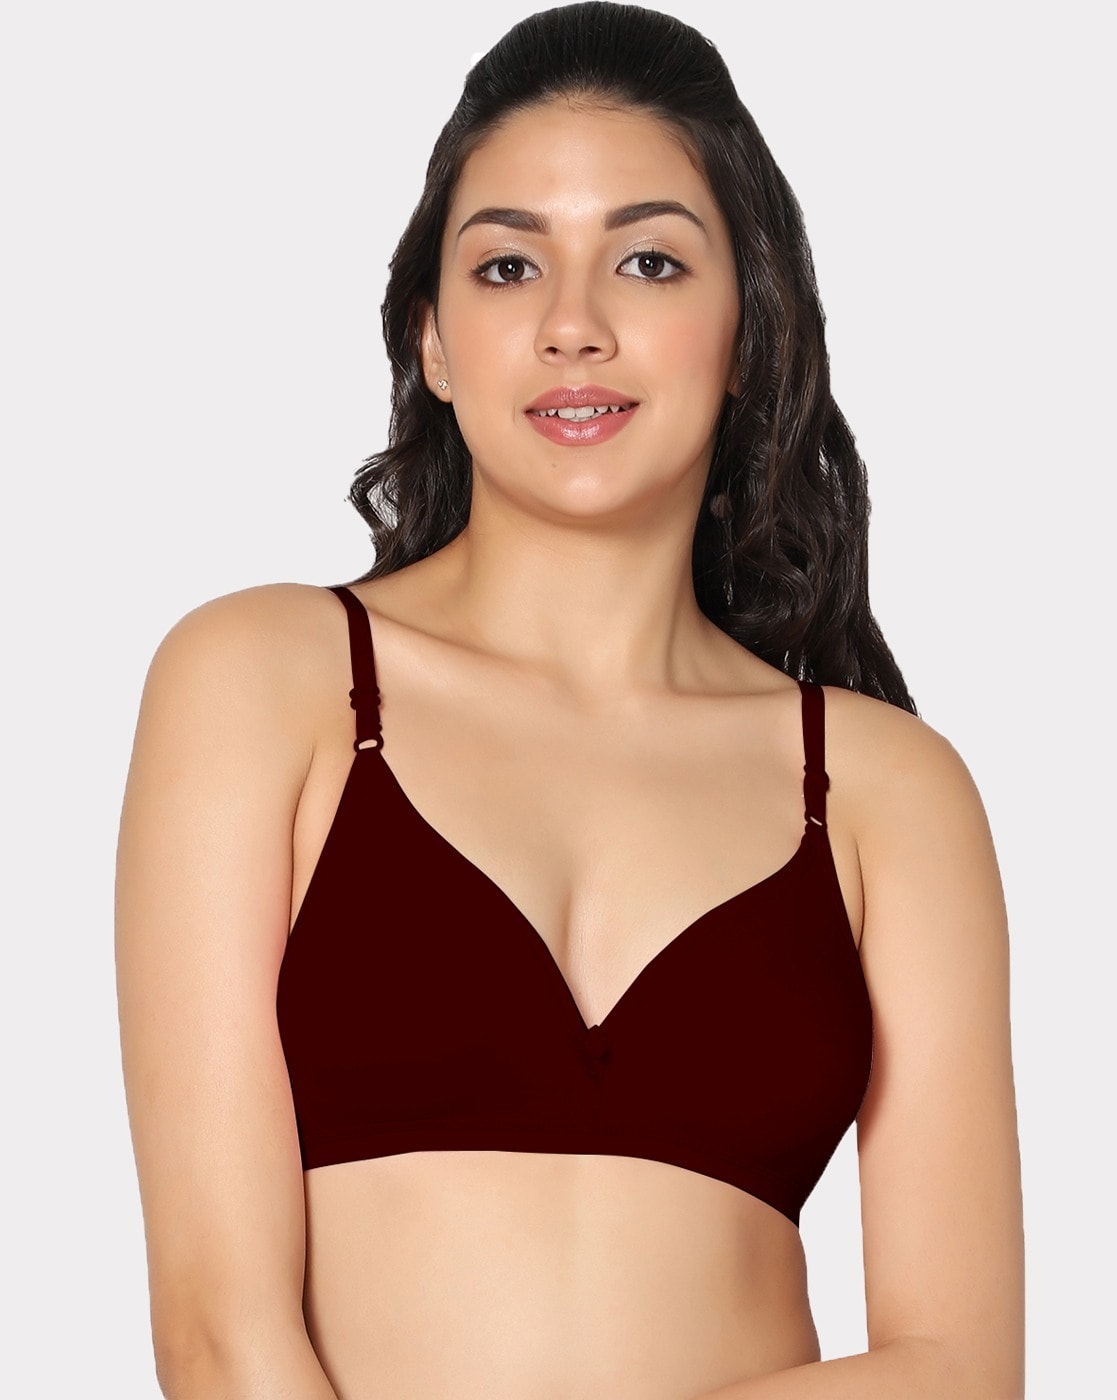 Buy Viral Girl Women's Cotton Maroon Push-up Padded Bra Online at Low  Prices in India 